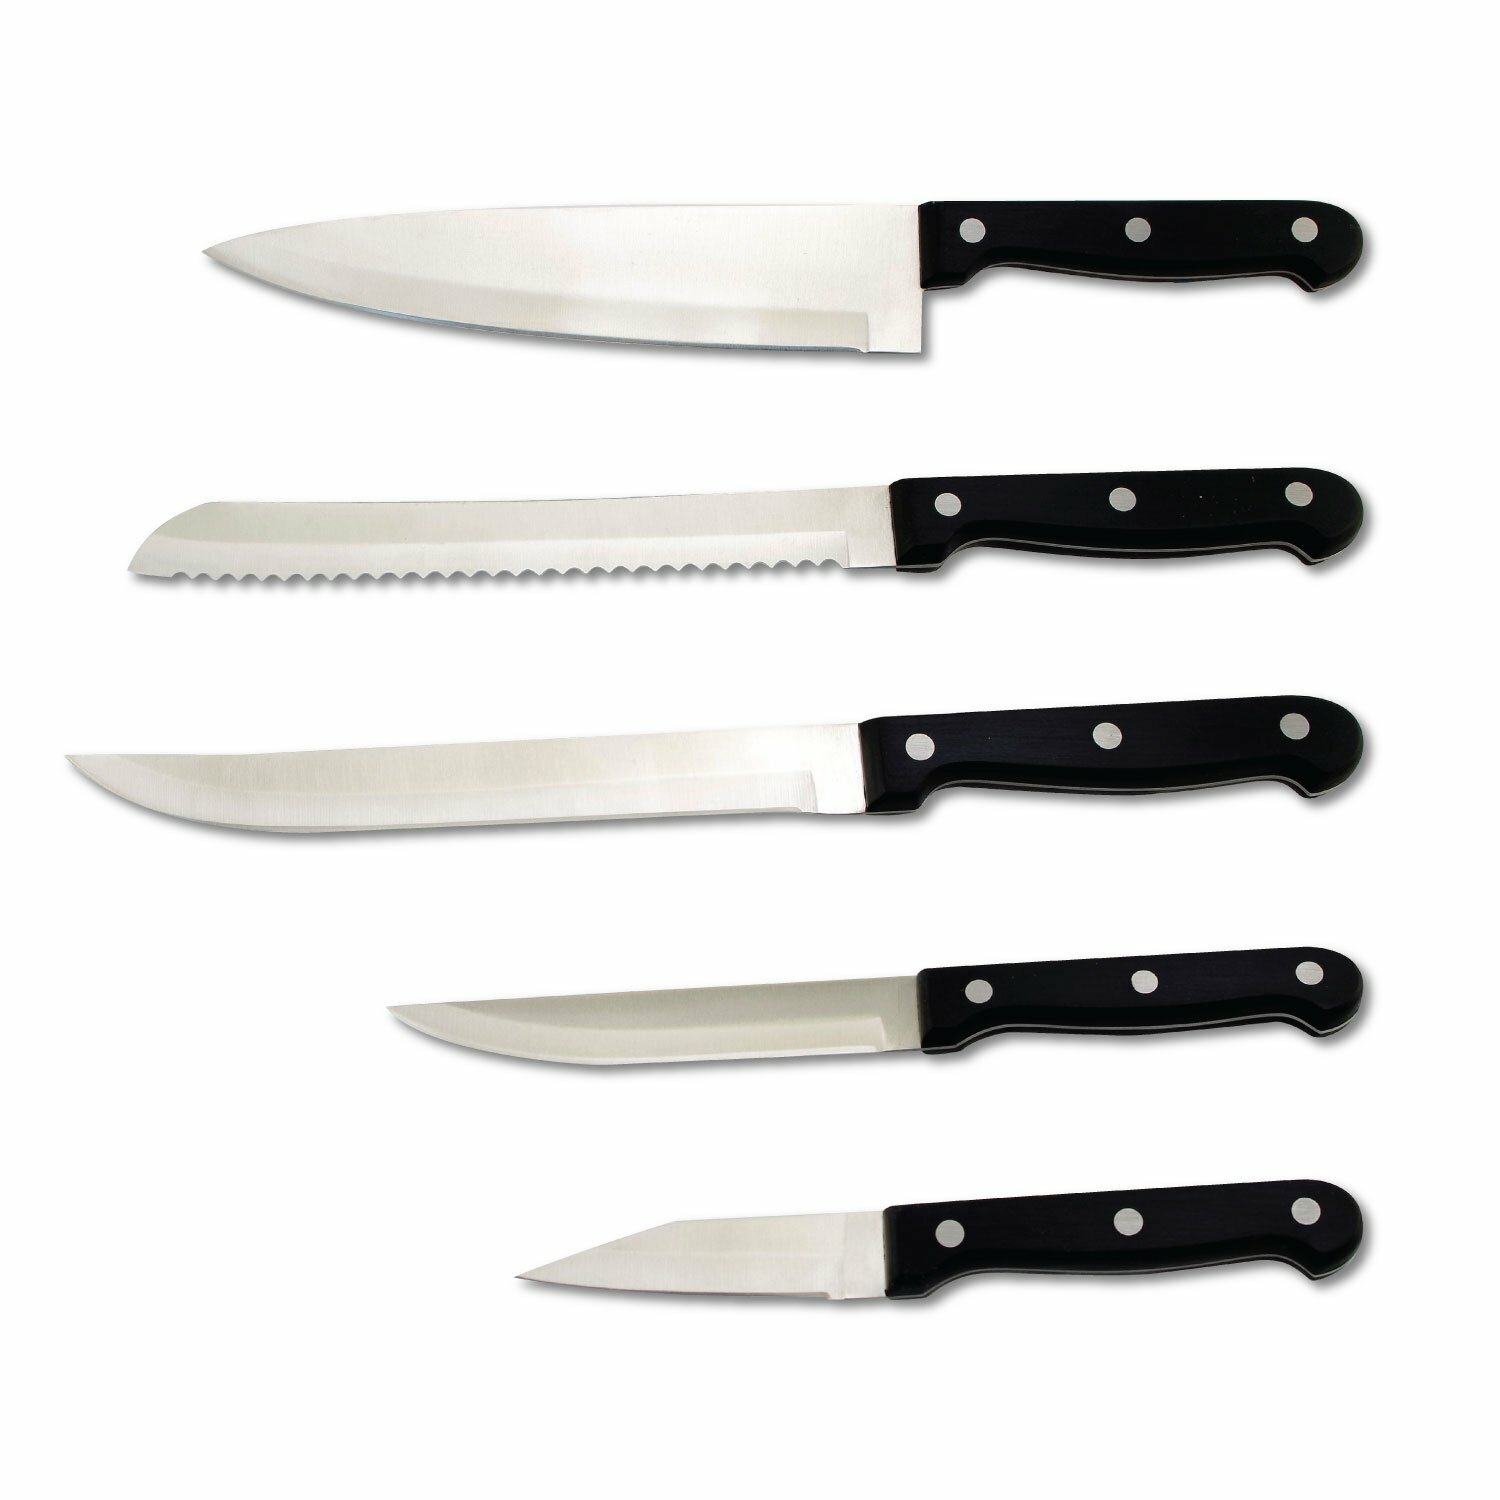 Stainless Steel Kitchen Knife Set $29 Shipped on